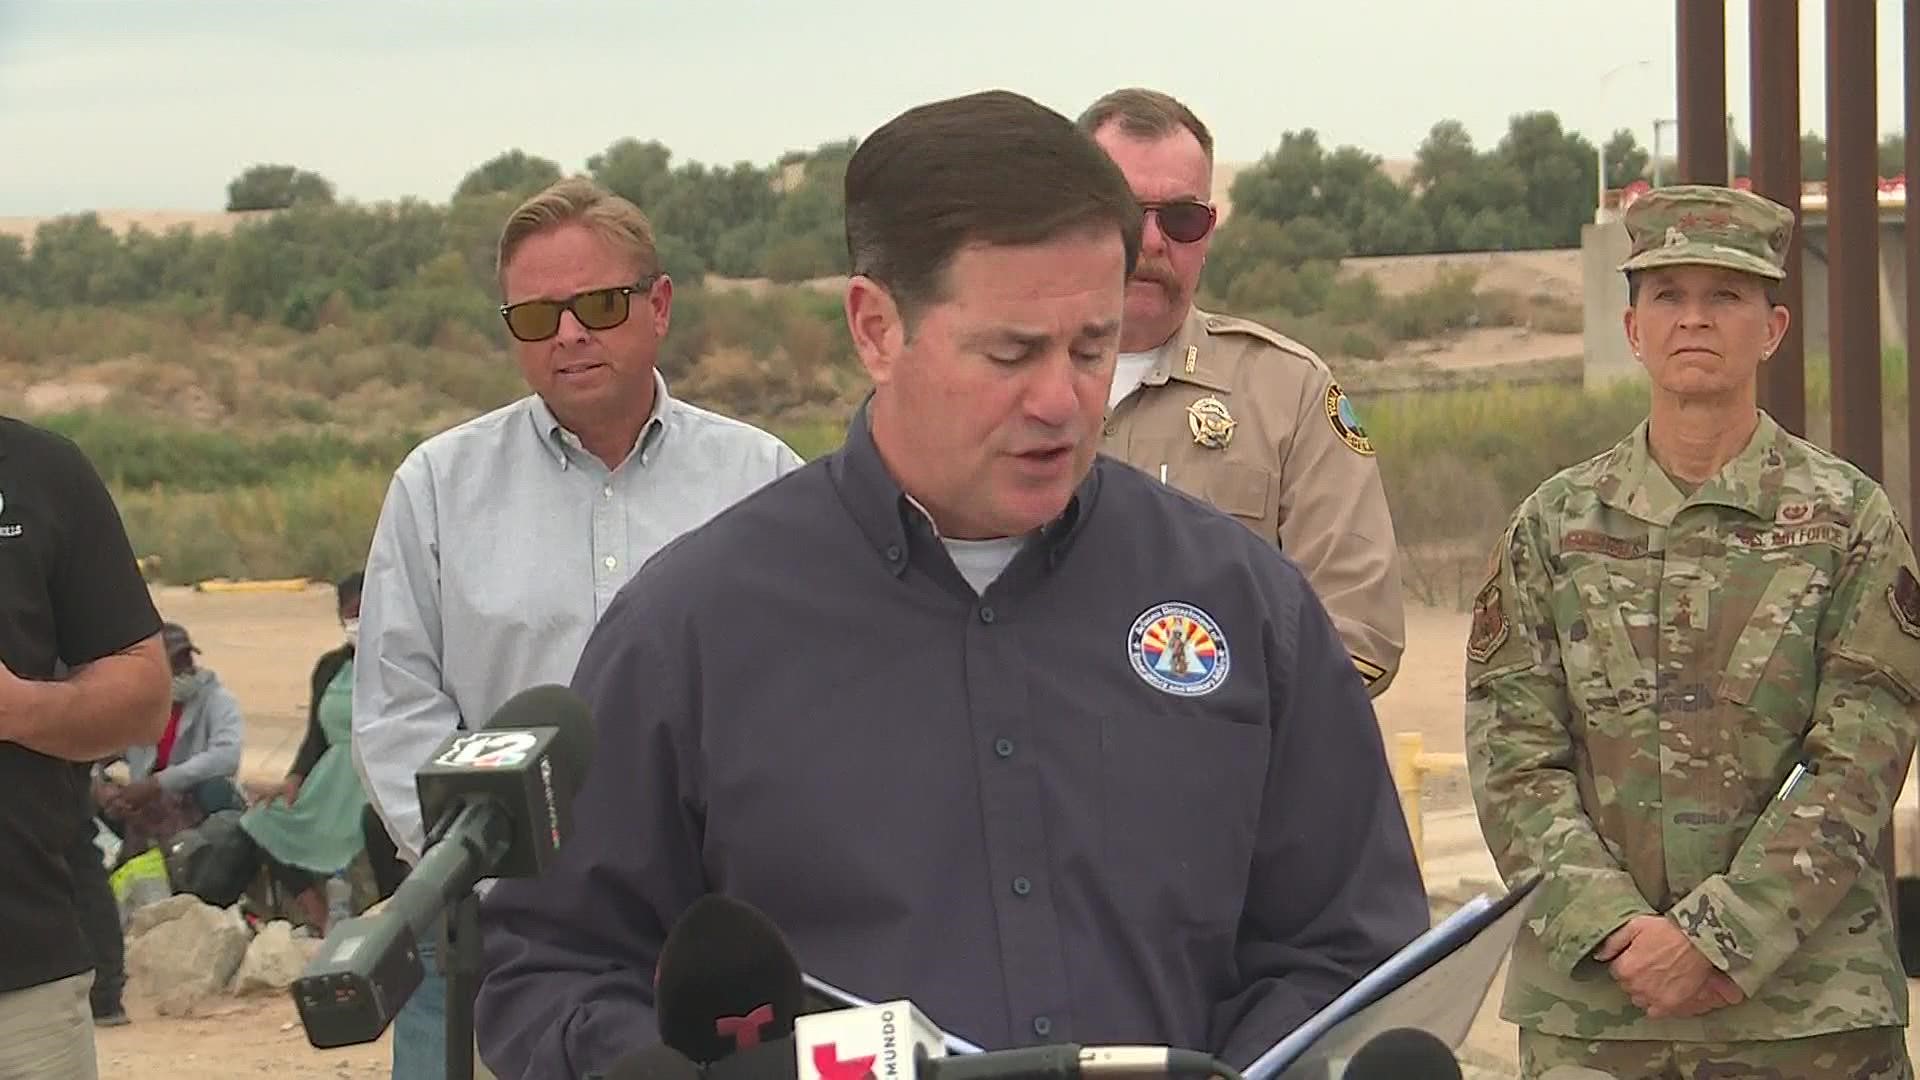 Arizona Governor Douct Ducey held a press conference Tuesday to discuss Arizona's plan to handle the surge of border crossers in the Yuma sector.